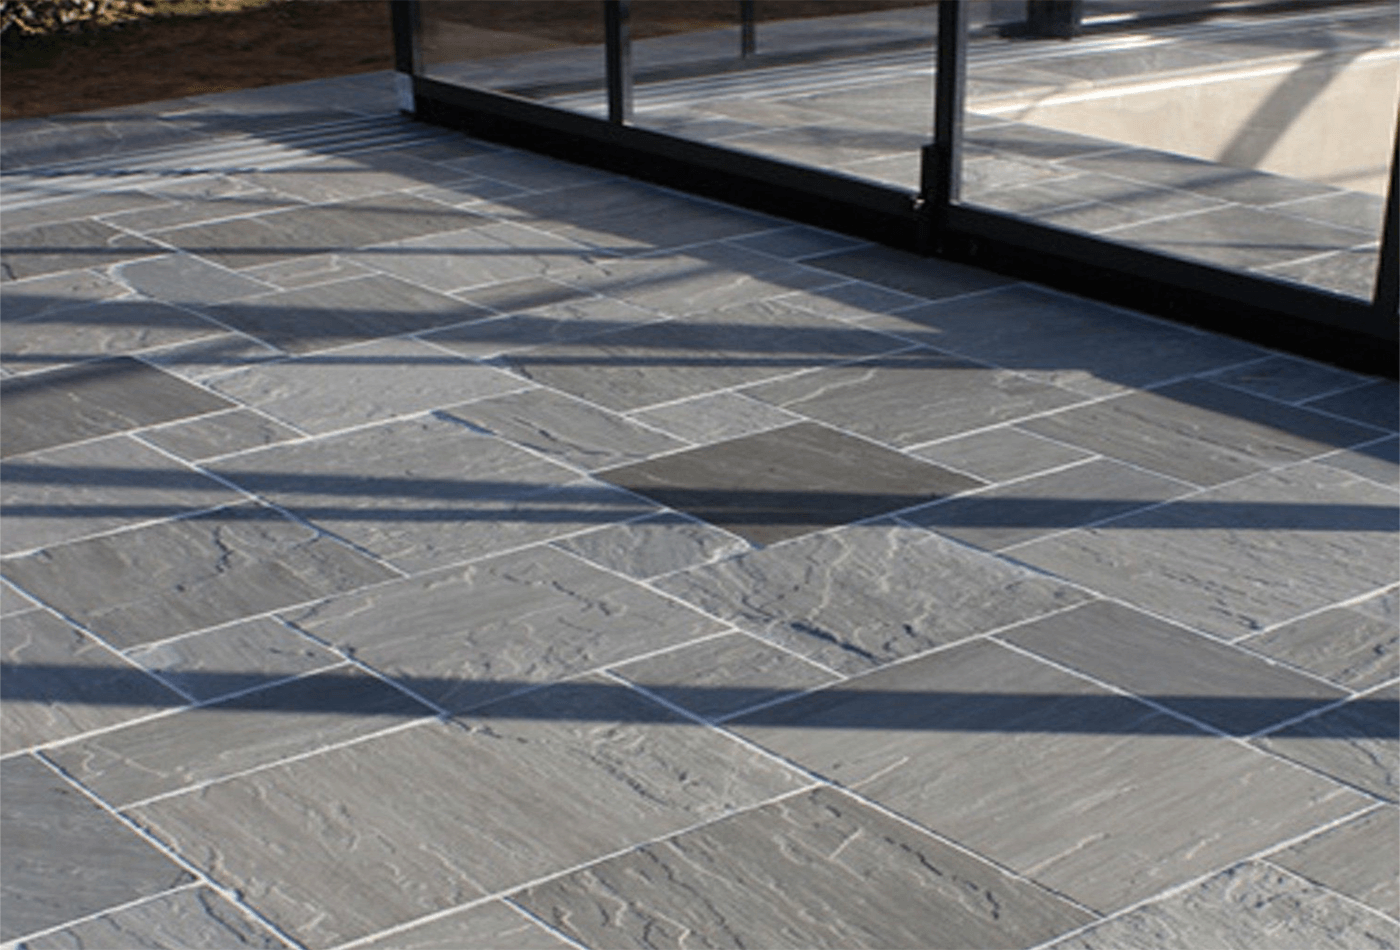 Kandla Grey Sandstone; Every Home Needs It For Their Floor